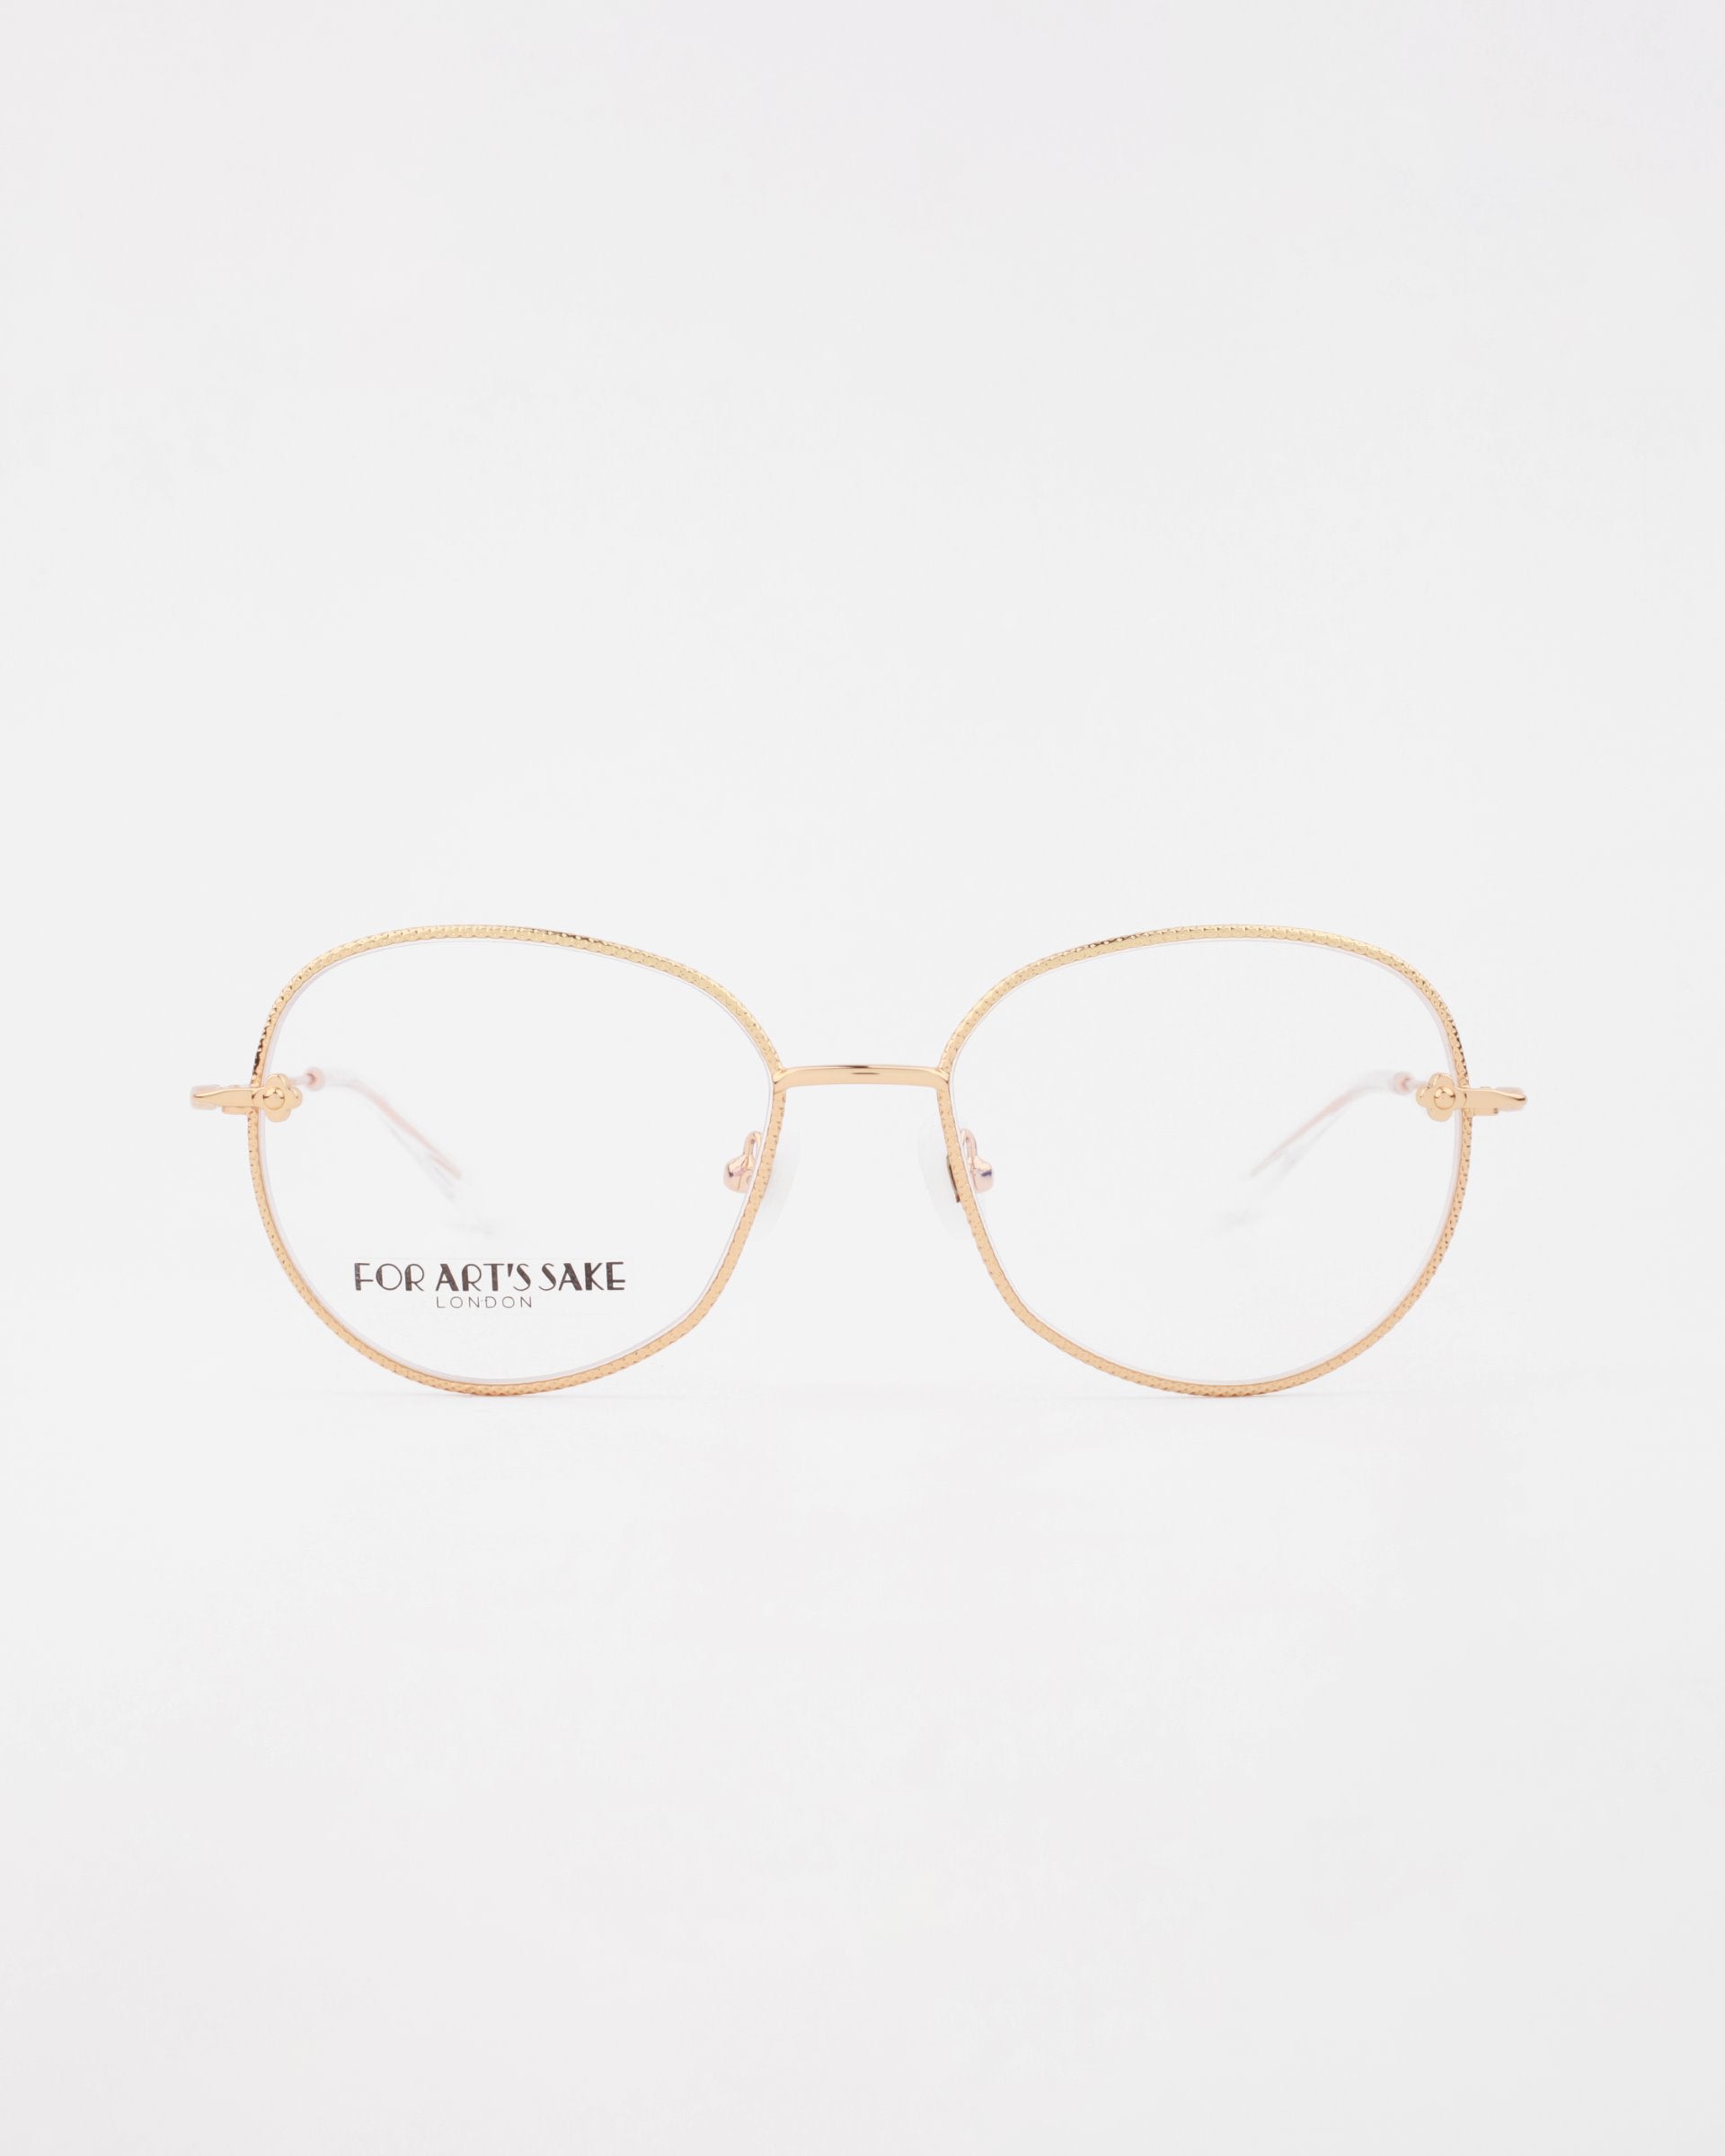 A pair of elegant handmade Jasmine eyeglasses with thin, gold-plated stainless steel frames against a white background. The frames have a square design with slightly rounded edges. The left lens has the brand name "For Art's Sake®" printed in black text.